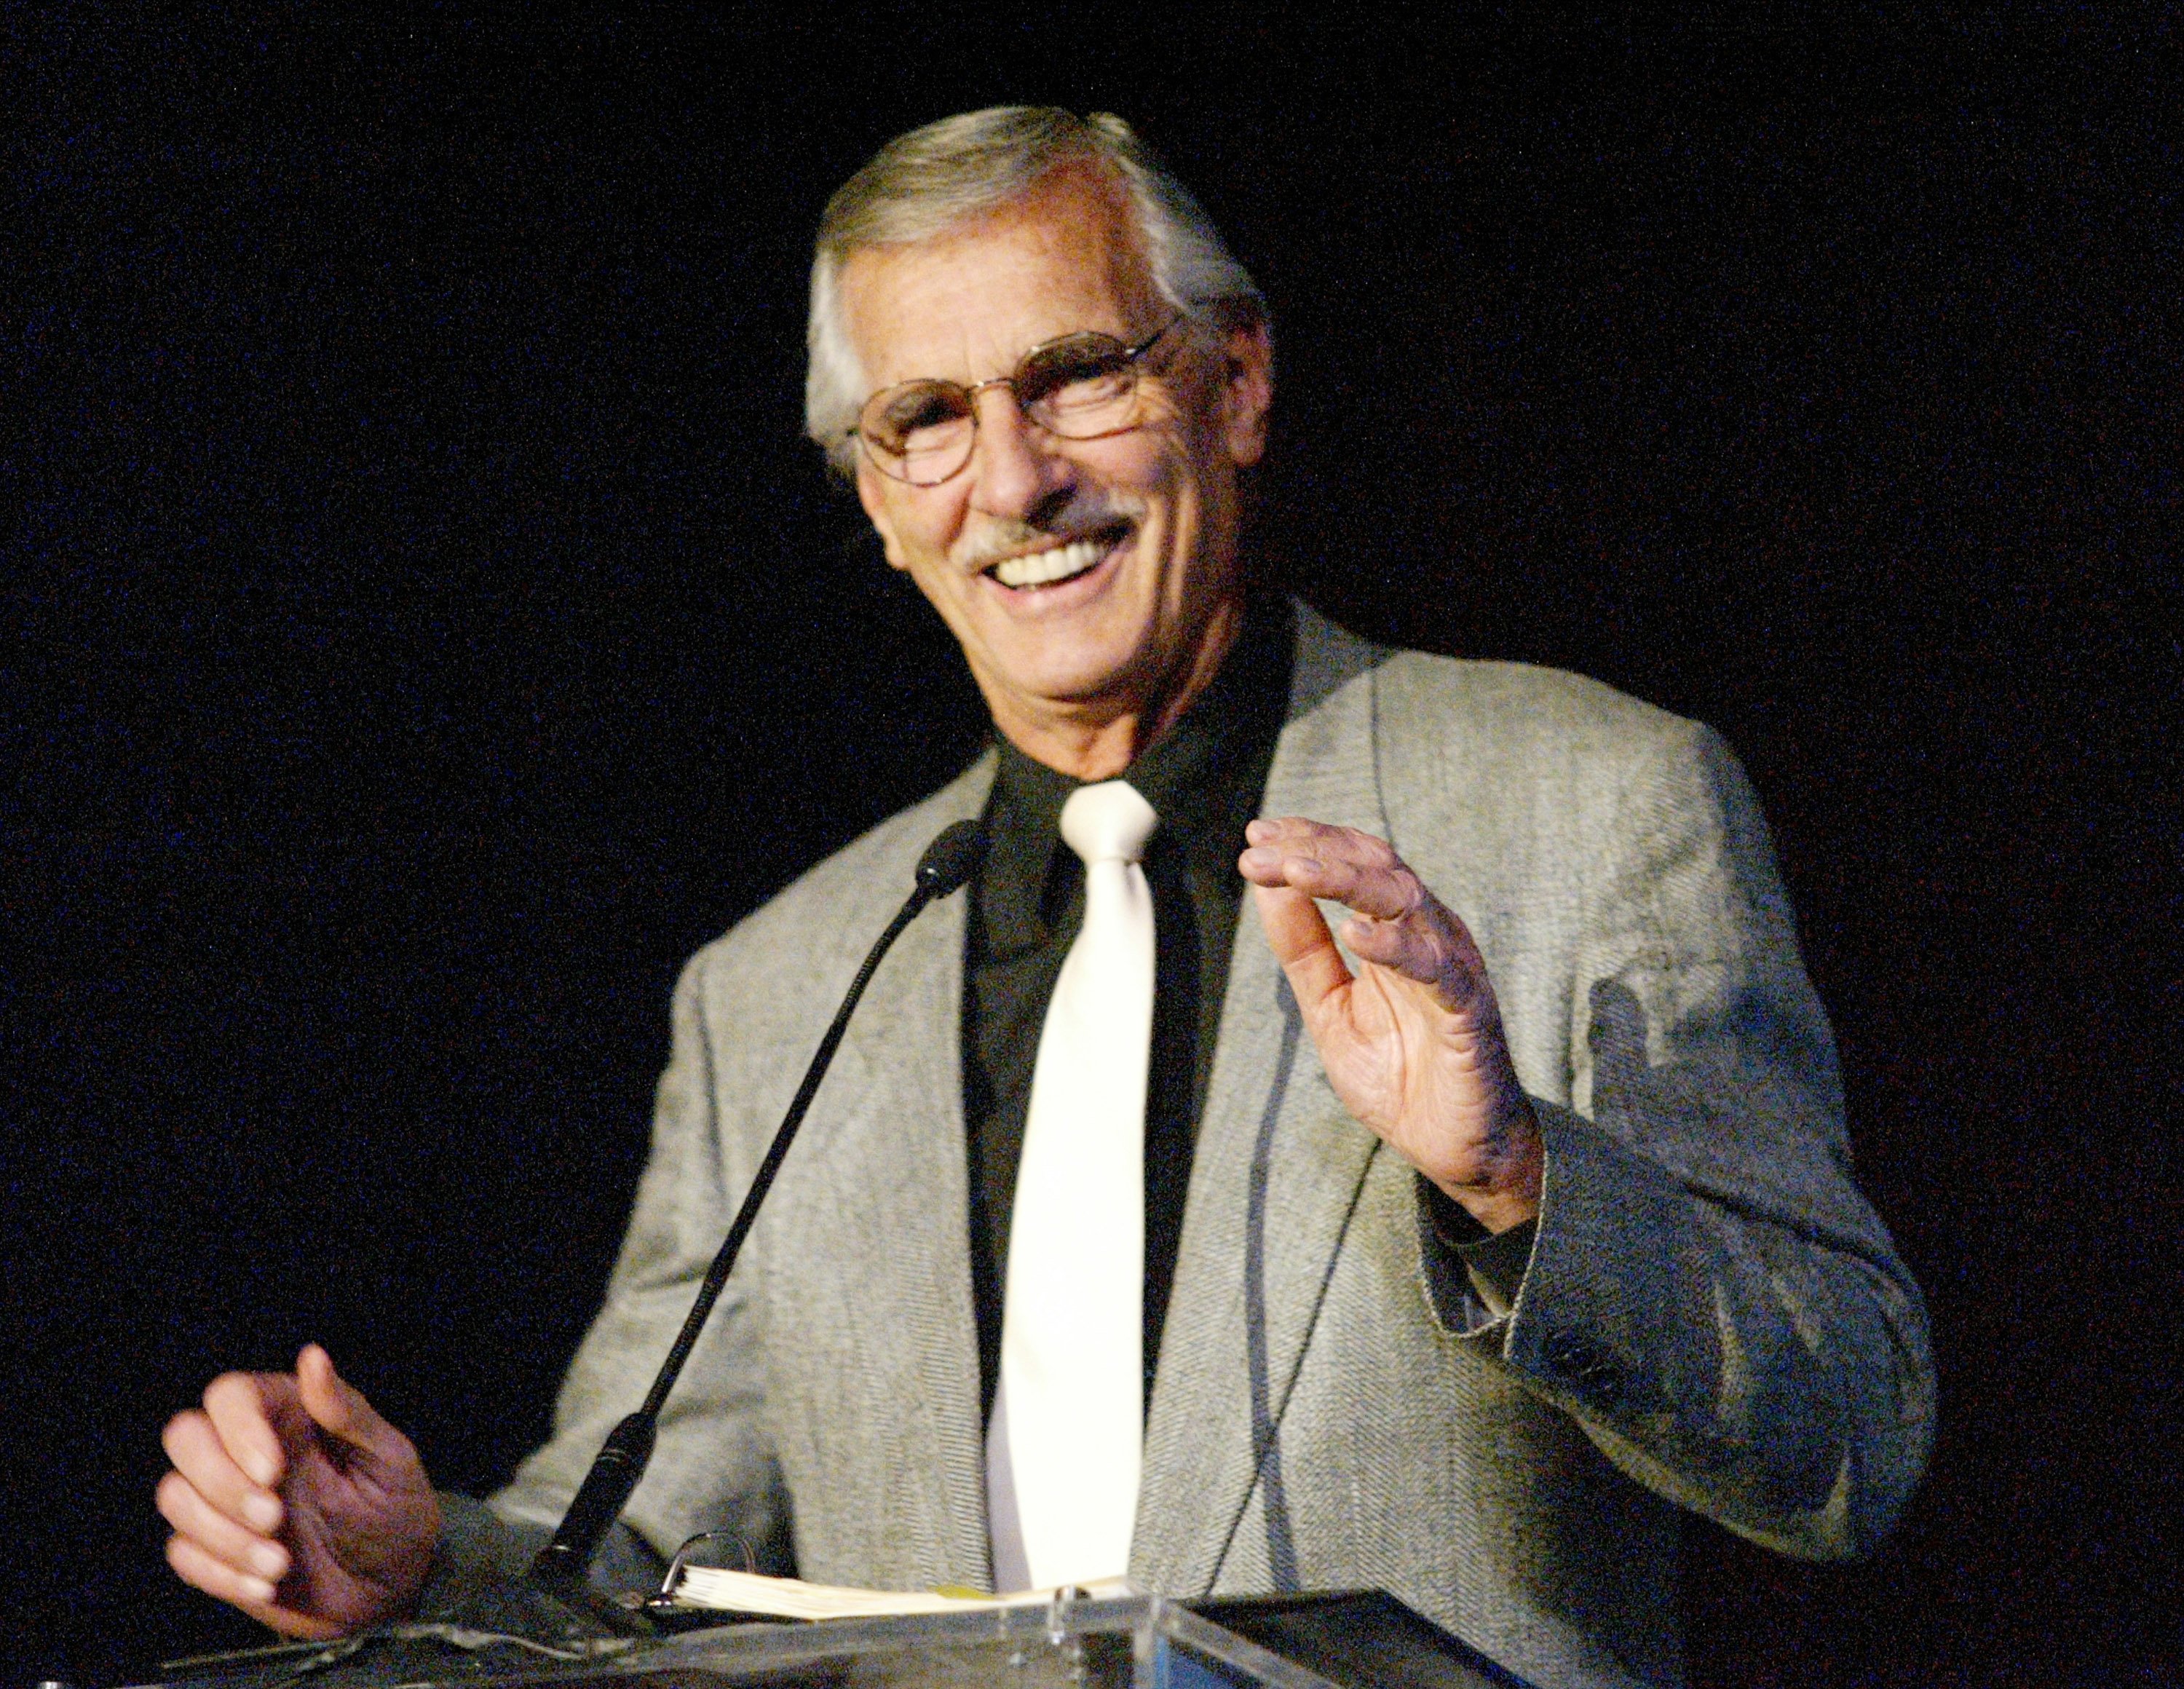 Dennis Weaver during The 8th Annual PRISM Awards at Hollywood Palladium in Hollywood, California. / Source: Getty Images